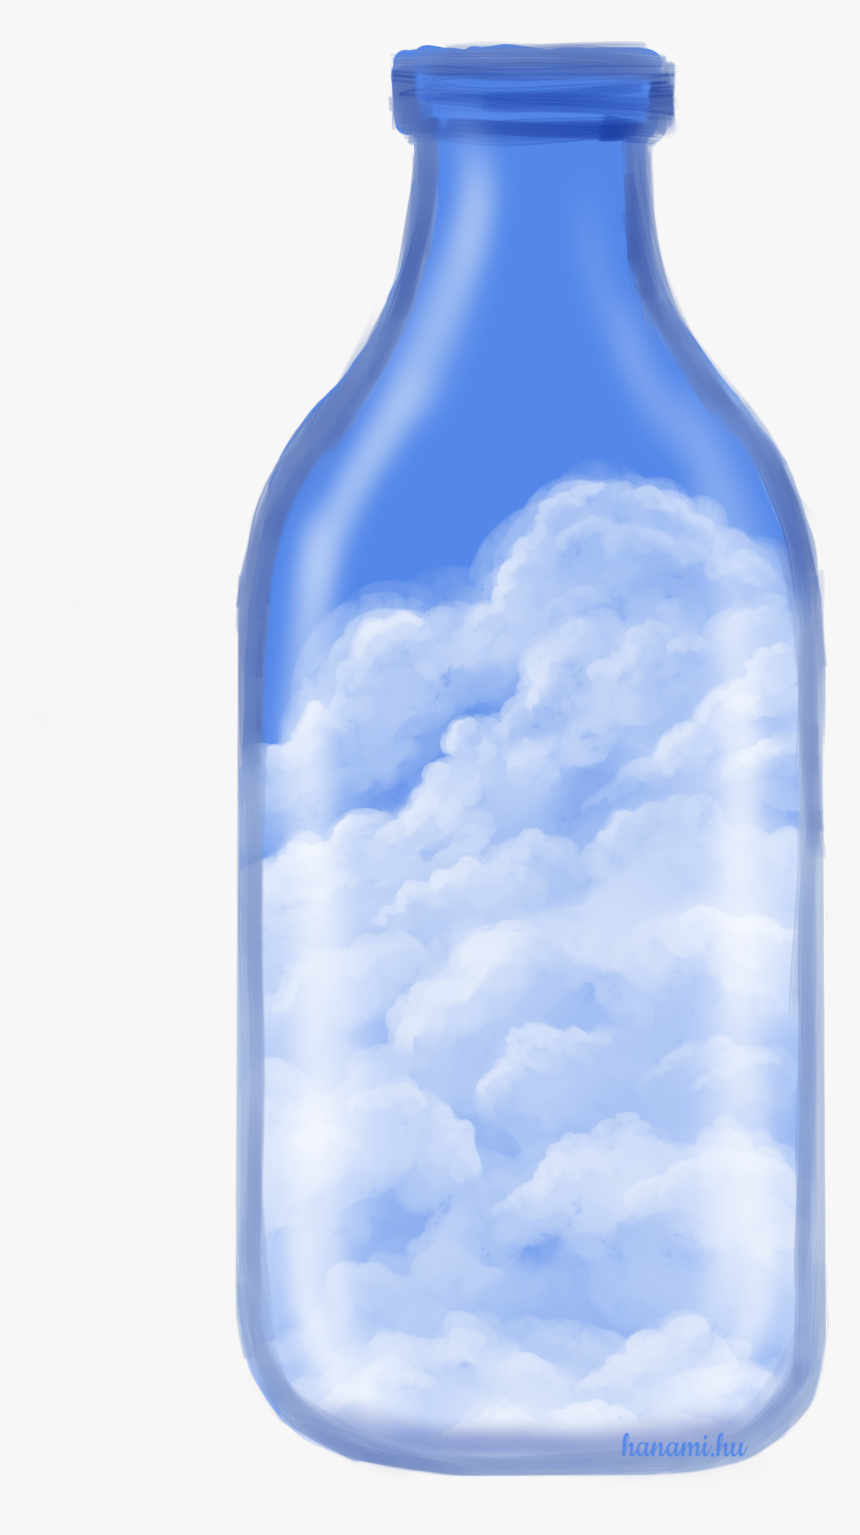 Clouds In A Bottle
forgot To Post This Here, Oops - Glass Bottle, HD Png Download, Free Download